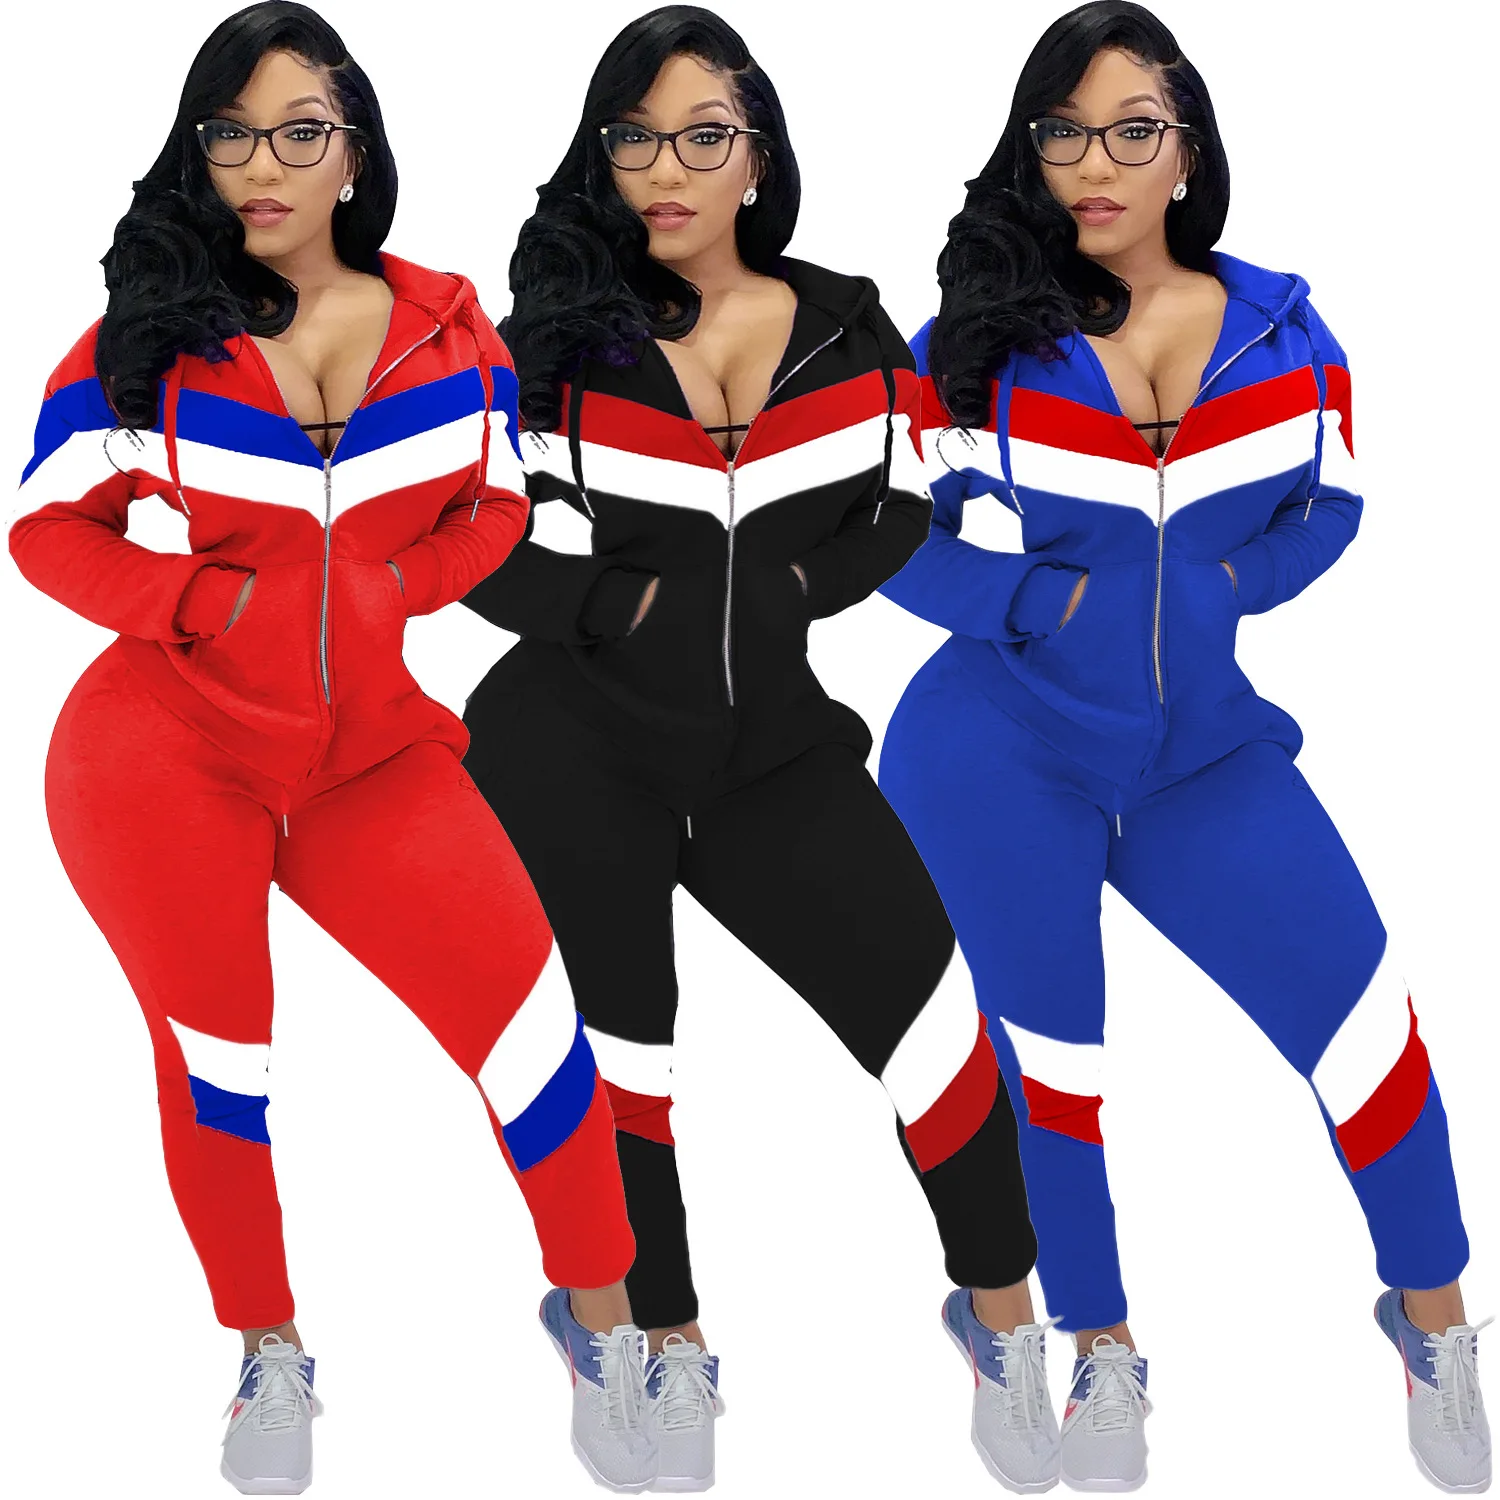 

Sport Zipper HOODED Sweatsuit Women's Set Track Jacket Legging Pants Set Active Matching Tracksuit Two Piece Fitness Outfit Set